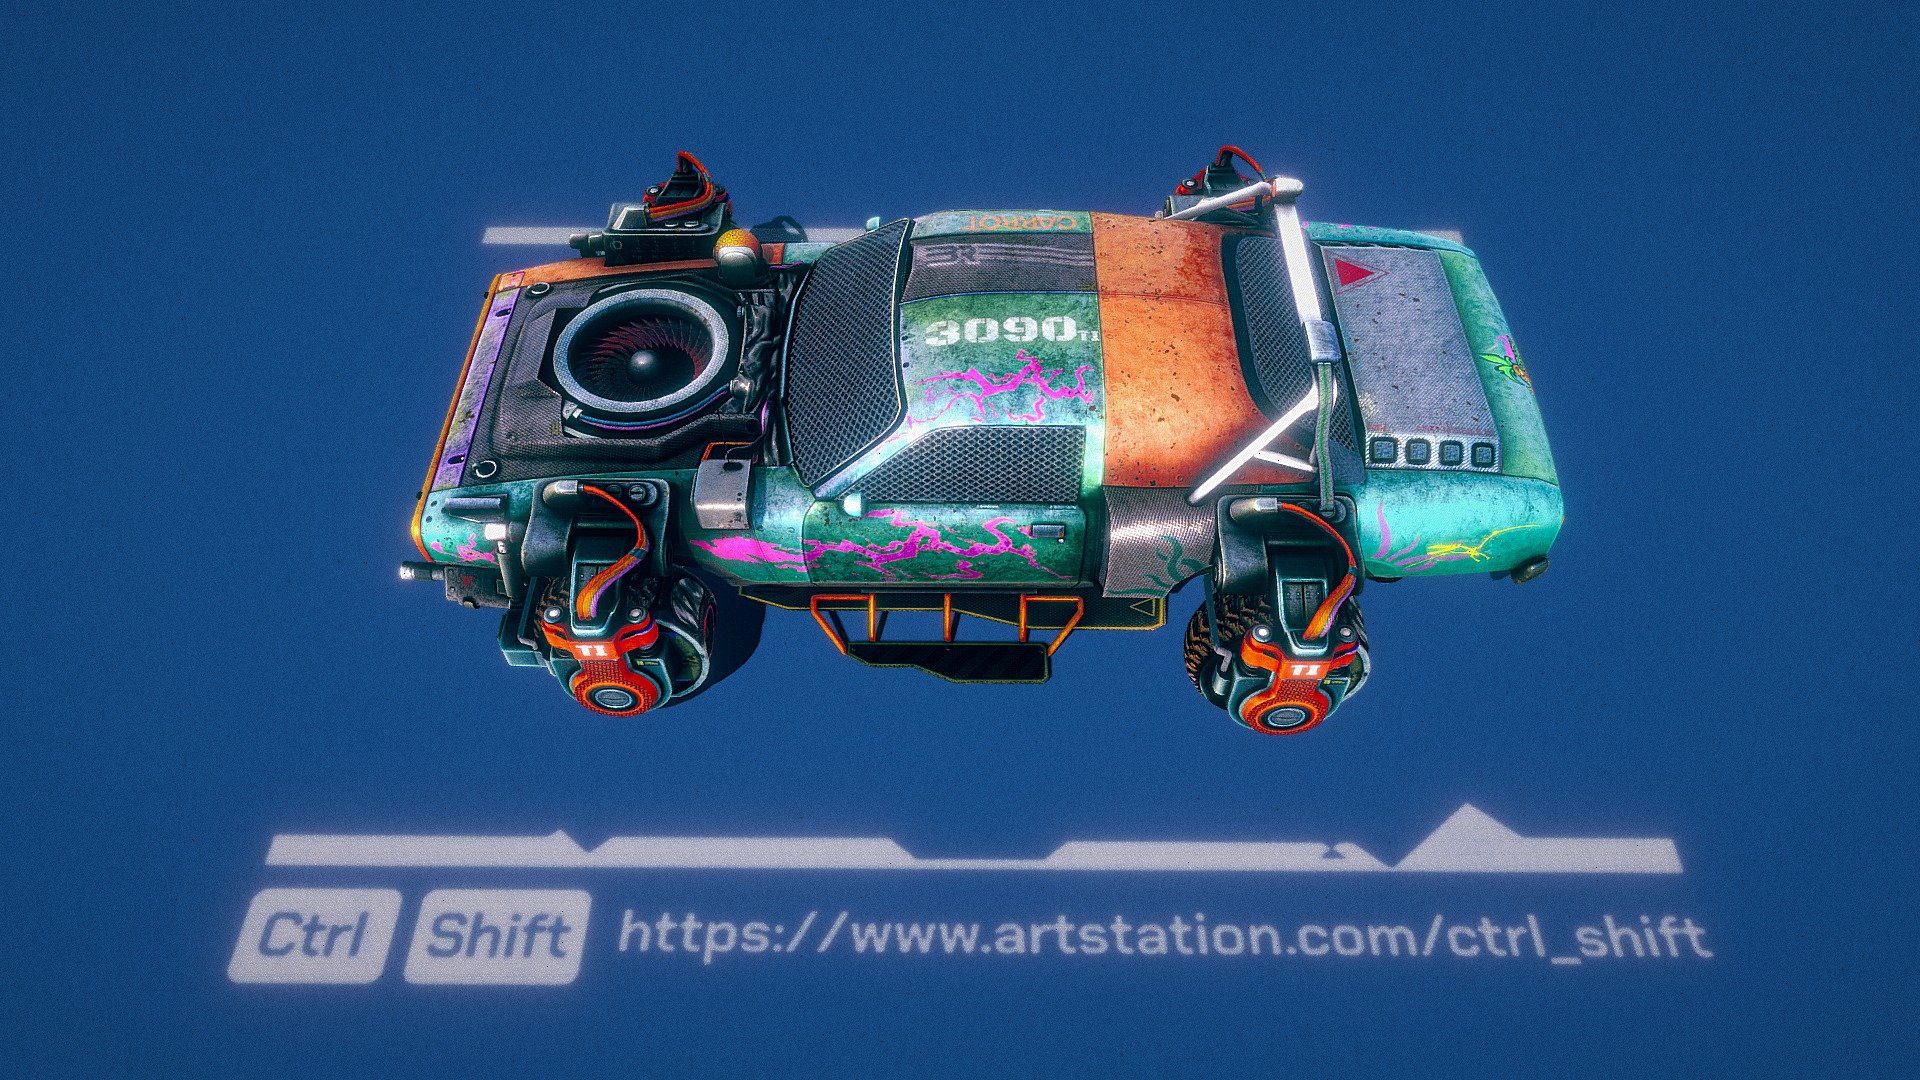 Made this concept while I was participating in Cyber warfare challenge, concepting took 3 days, 1-2 weeks spent to finalize geo and rig.

Additional materials on Artstation: 
https://www.artstation.com/artwork/d0XE5A

Rig demo:
https://youtu.be/Brhb0-GpM0w - Cyberpunk hovercar animated - 3D model by CTRL_SHIFT 3d model